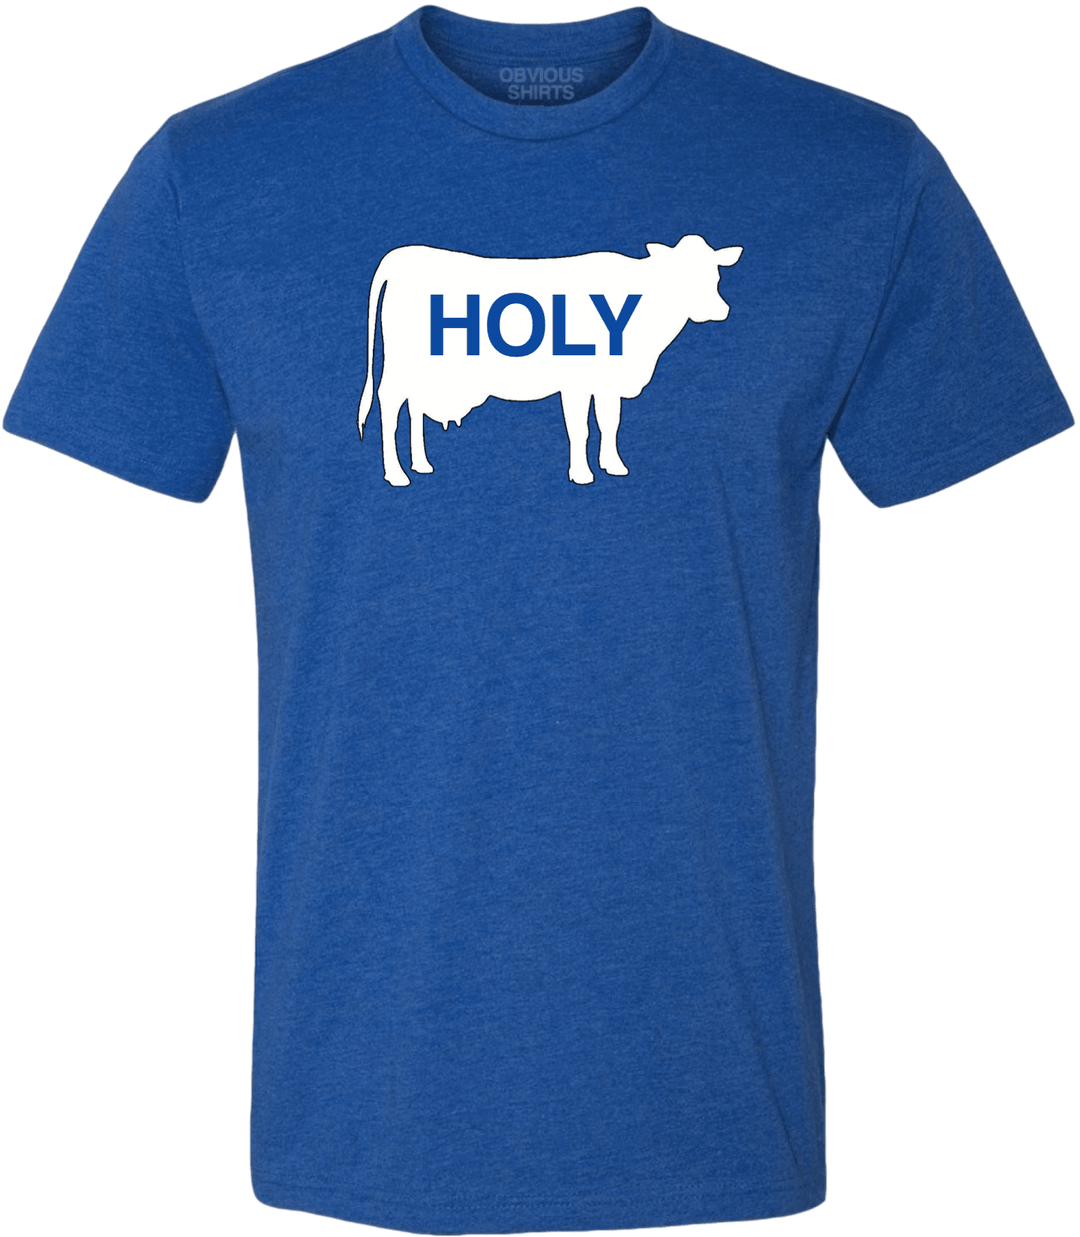 HOLY | OBVIOUS SHIRTS.